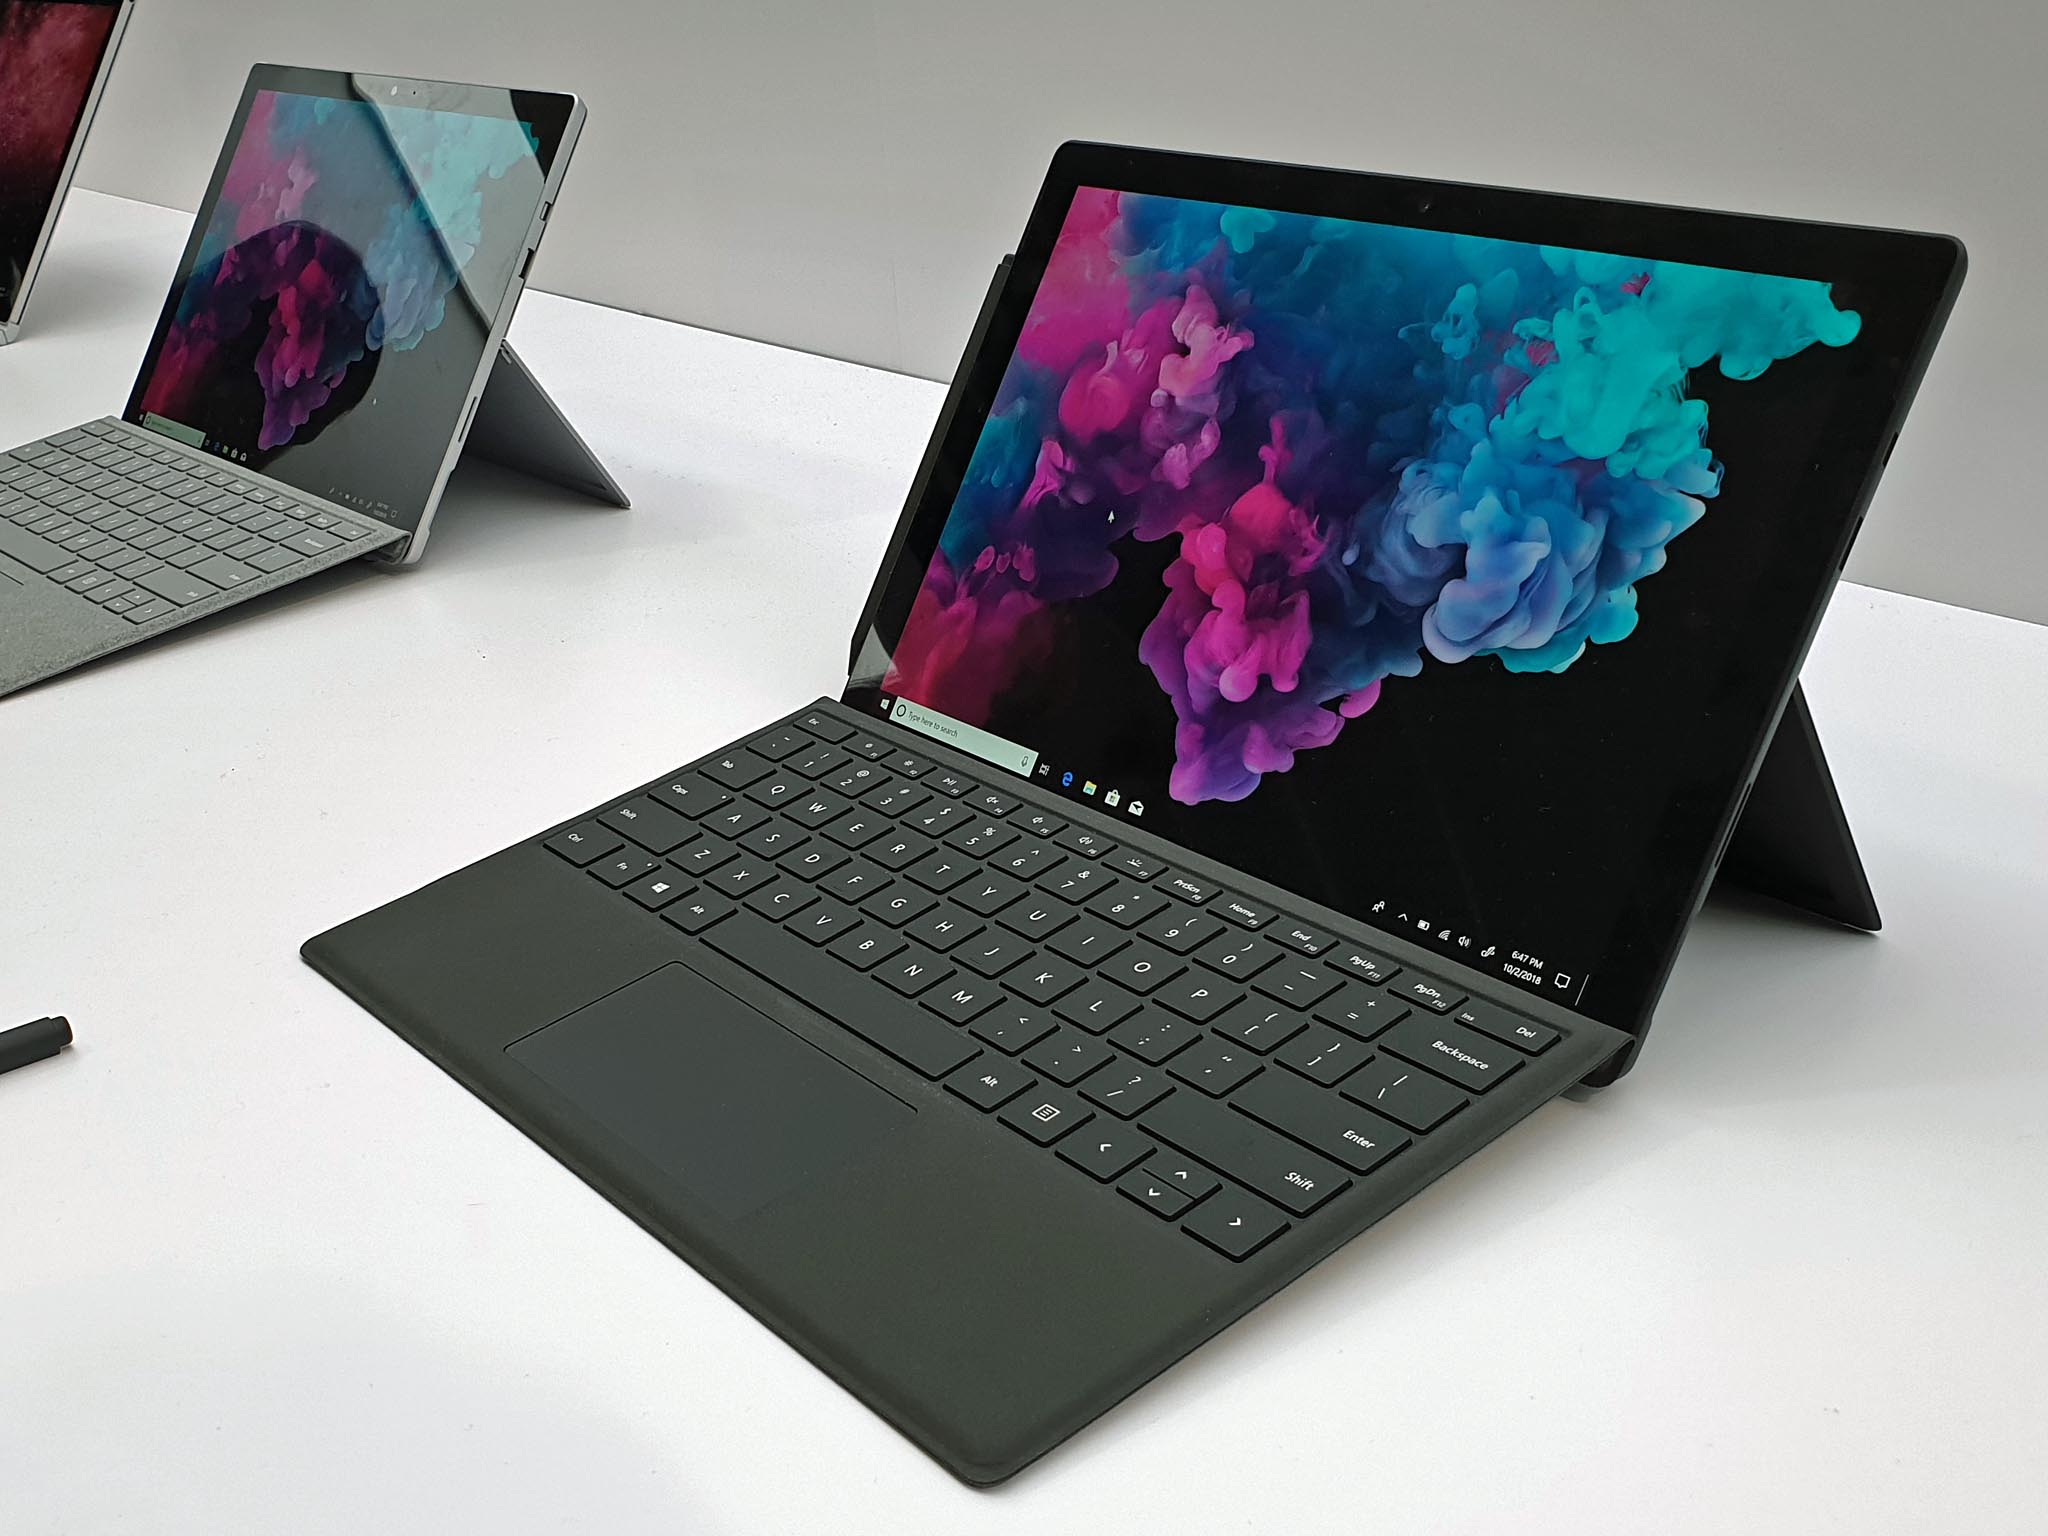 Future Surface products could include USB-C webcam, modular PC